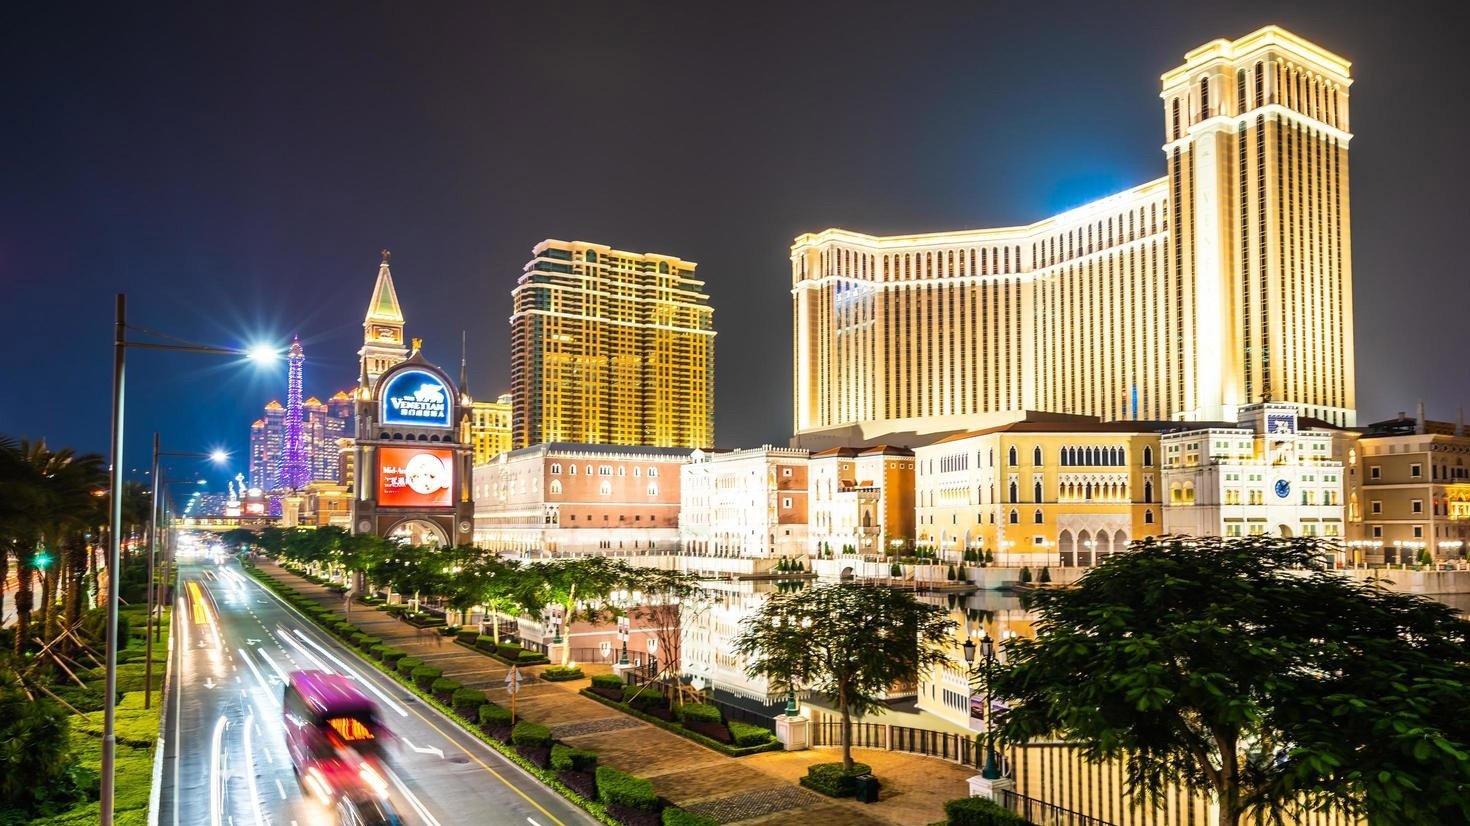 Macau casinos expected to have zero-revenue in coming months amid pandemic shutdown; bidding process to begin next month